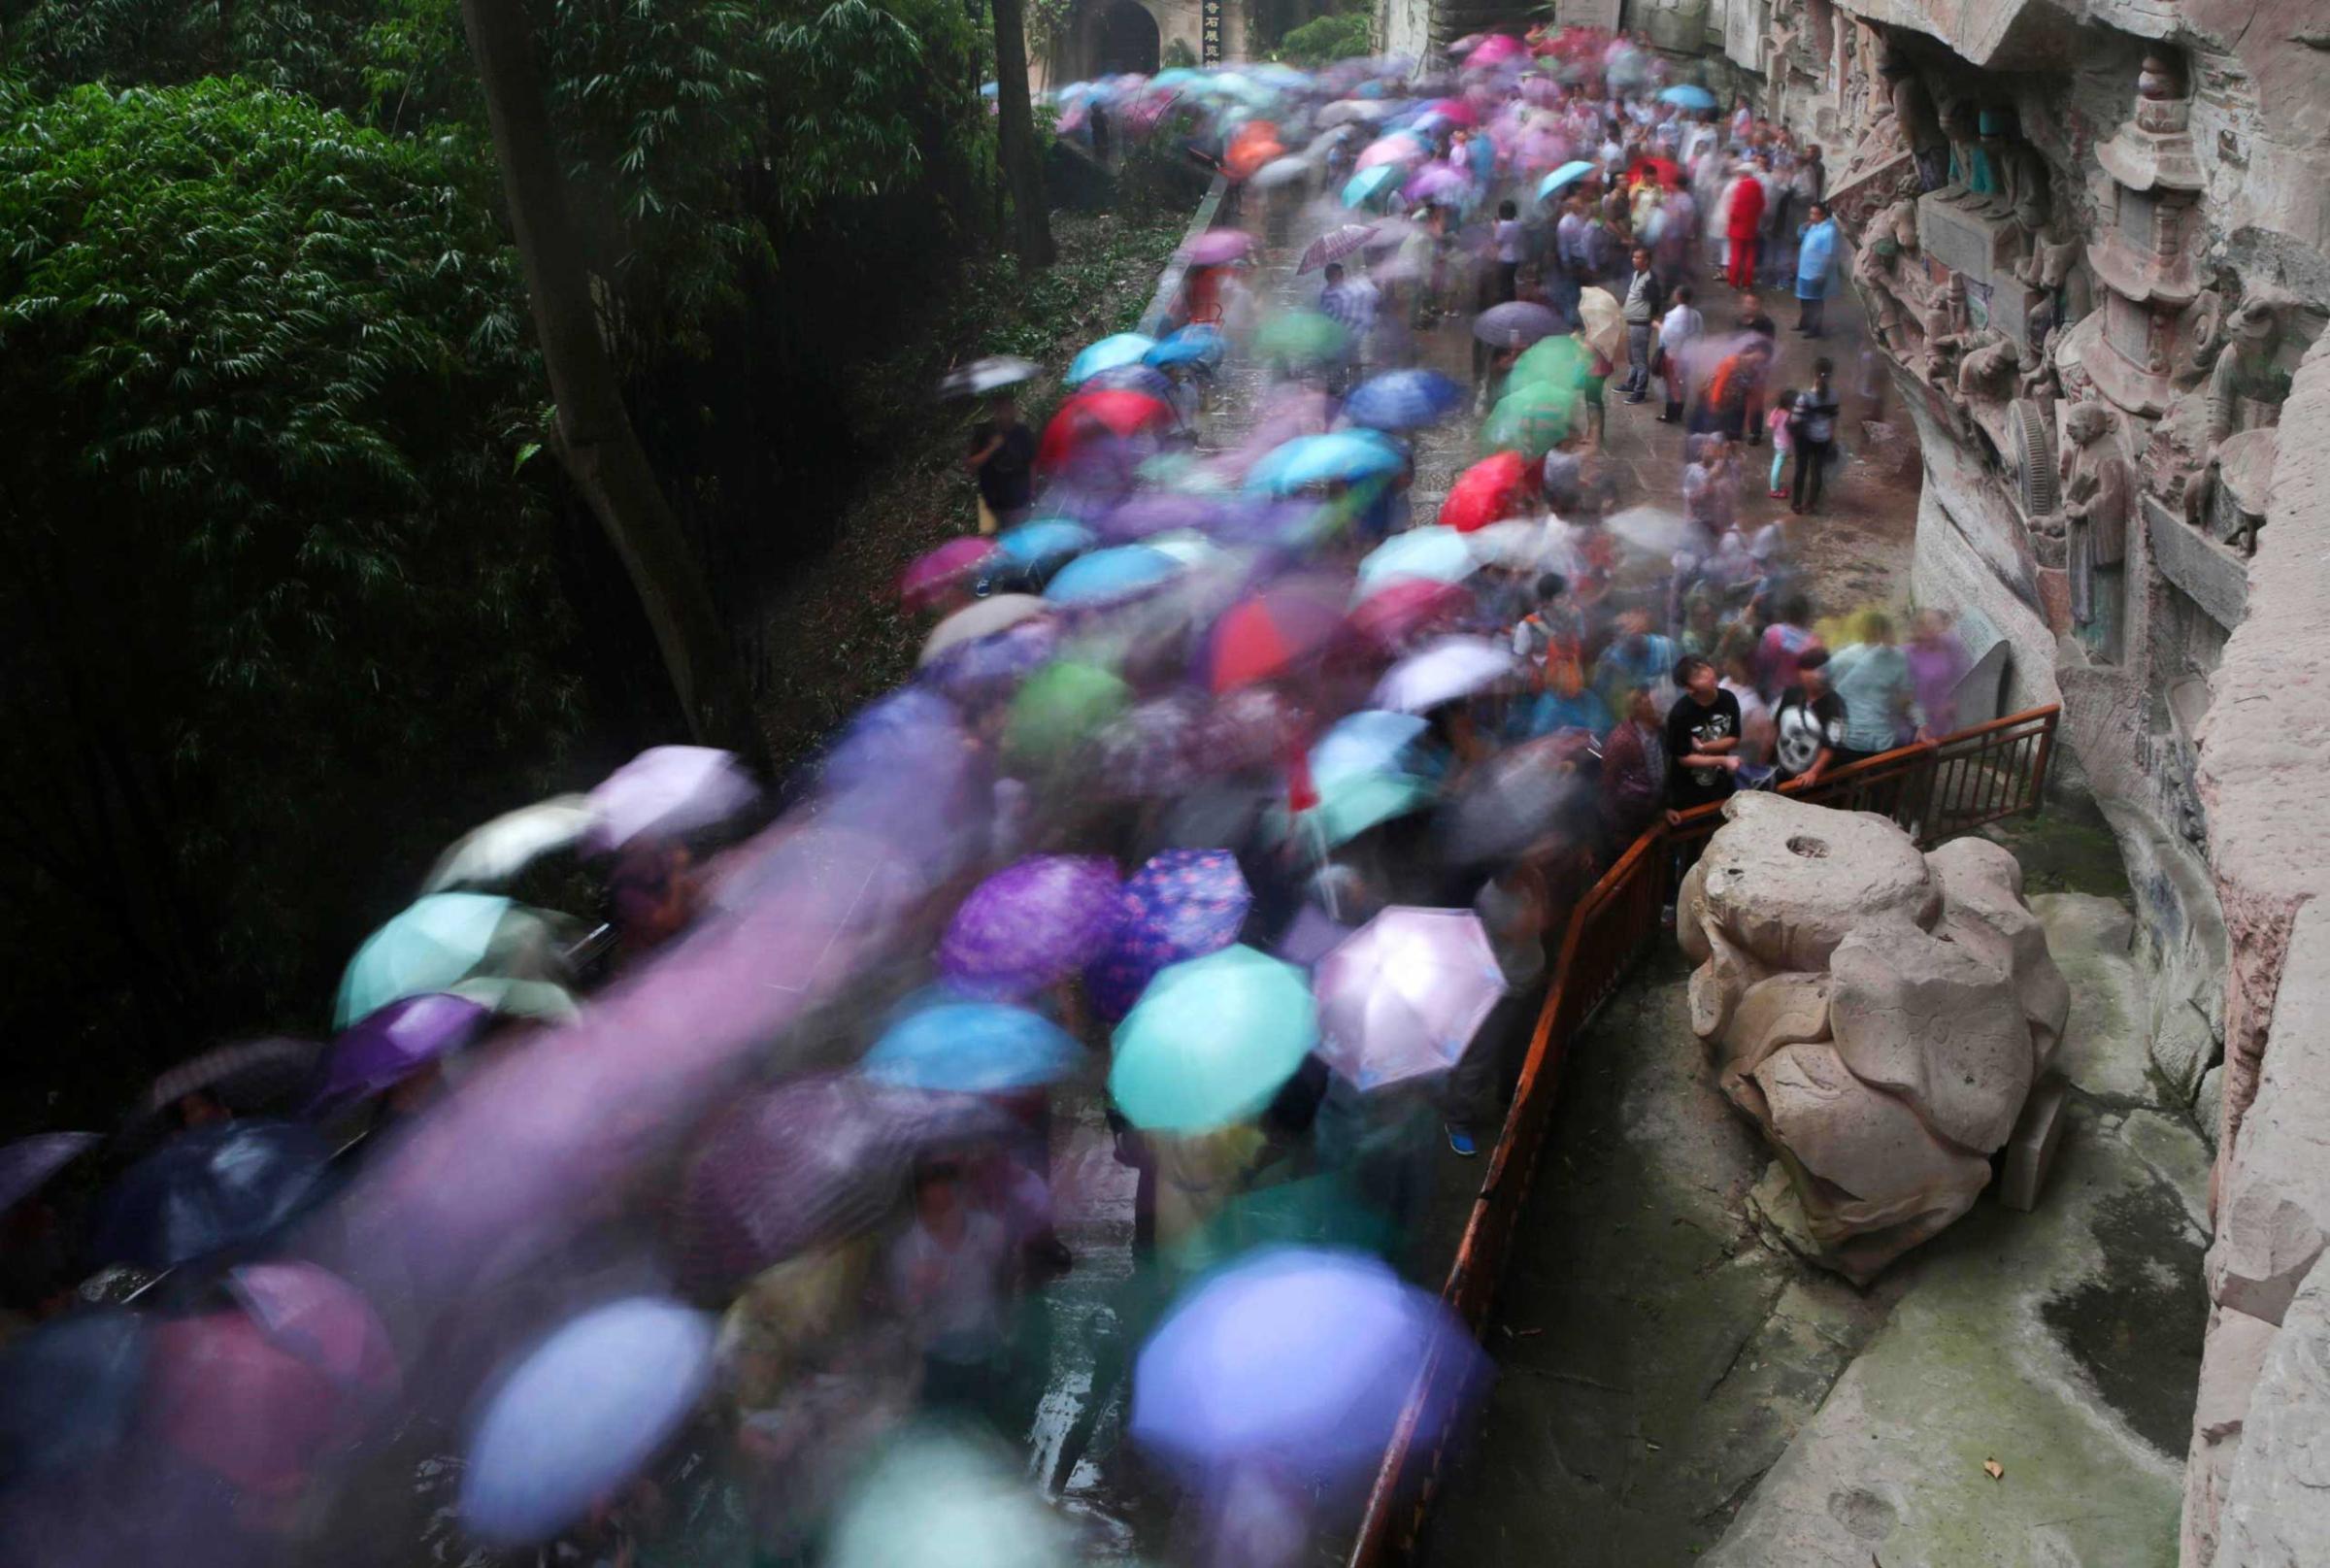 Tourists holding umbrellas crowd visit the stone sculptures at the Baoding Mountain during national day holidays, in Chongqing